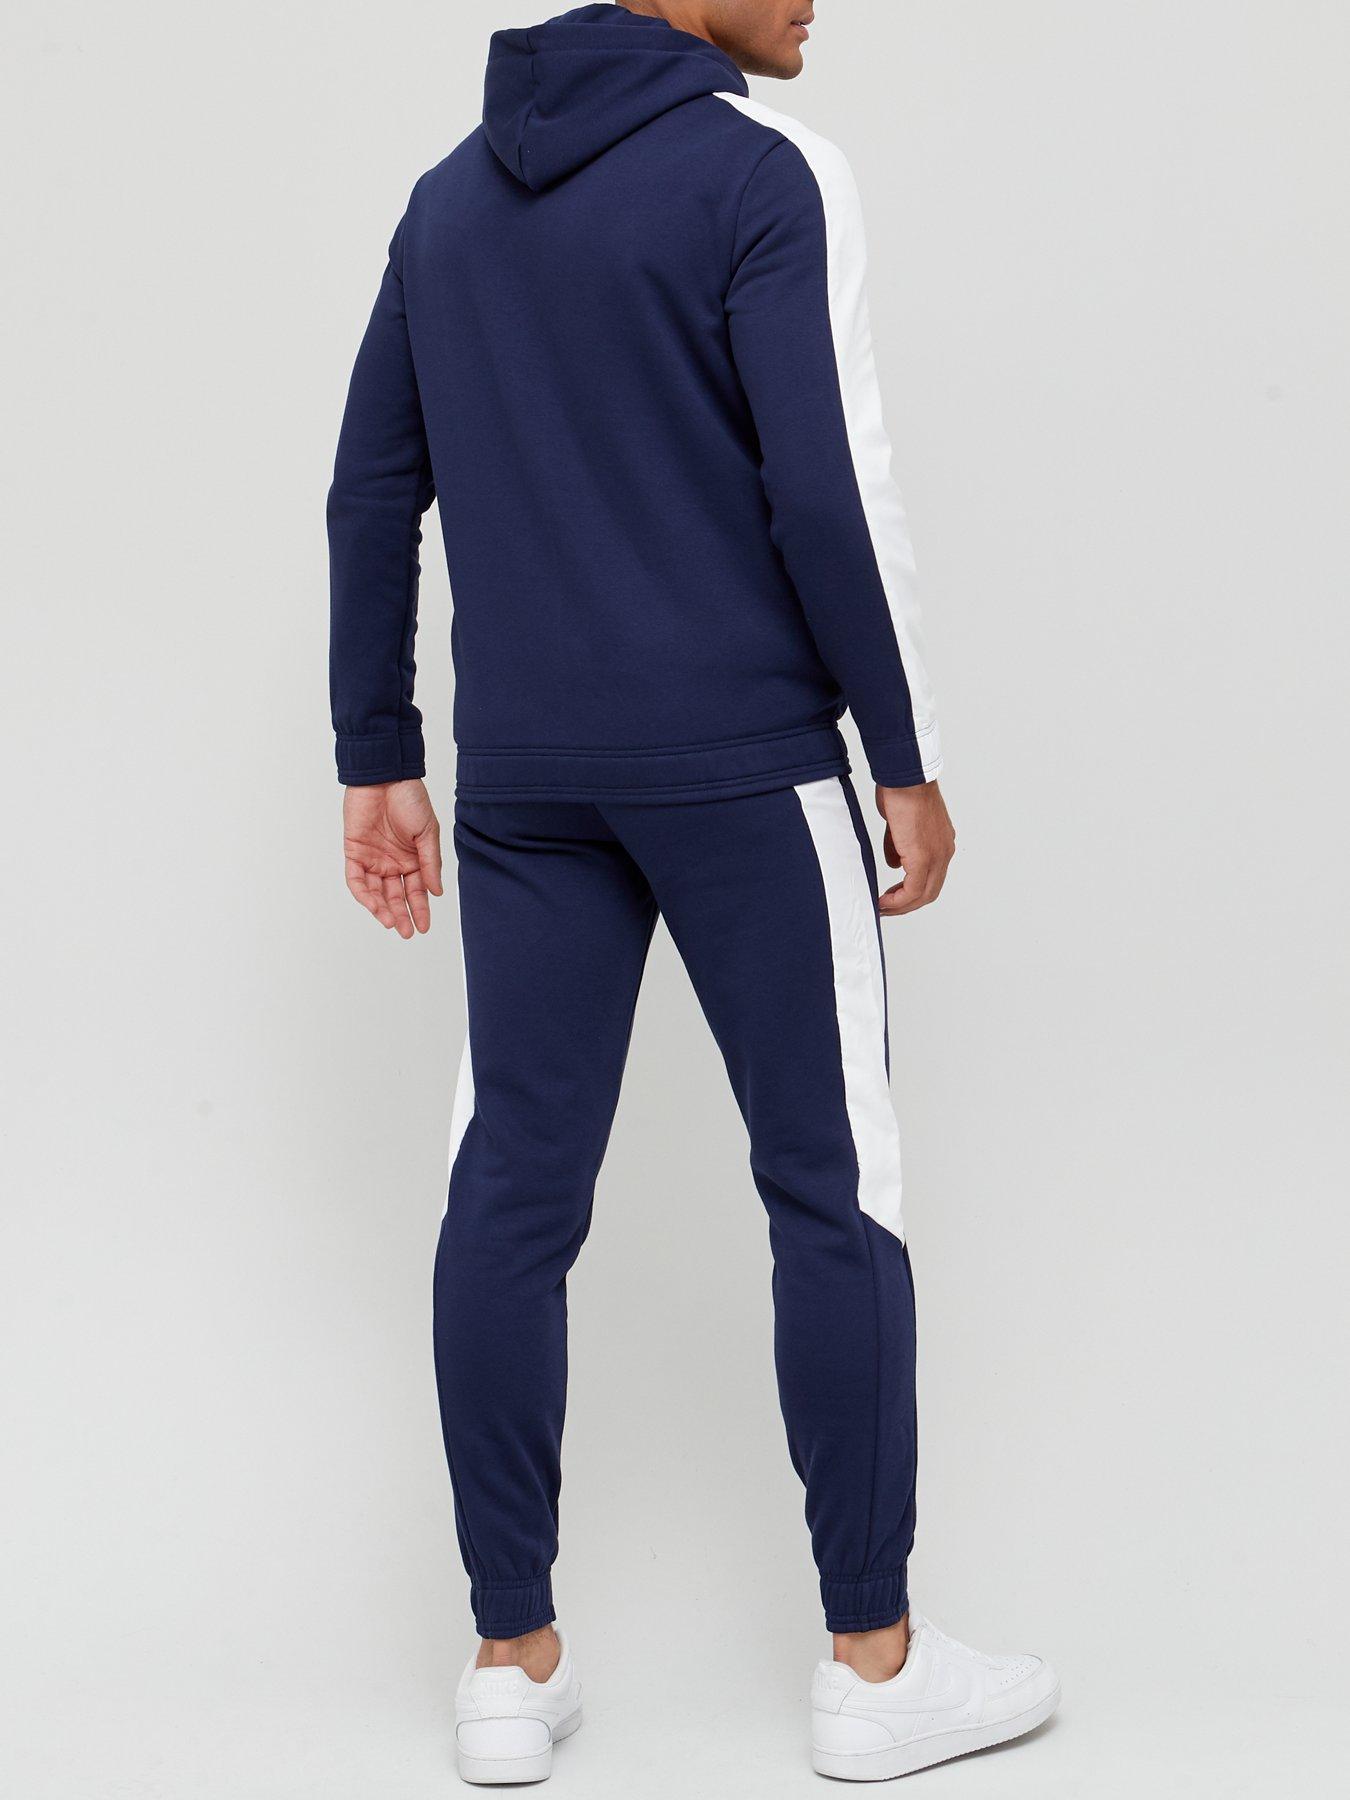 Puma Hooded Sweat Suit - Navy | Very.co.uk